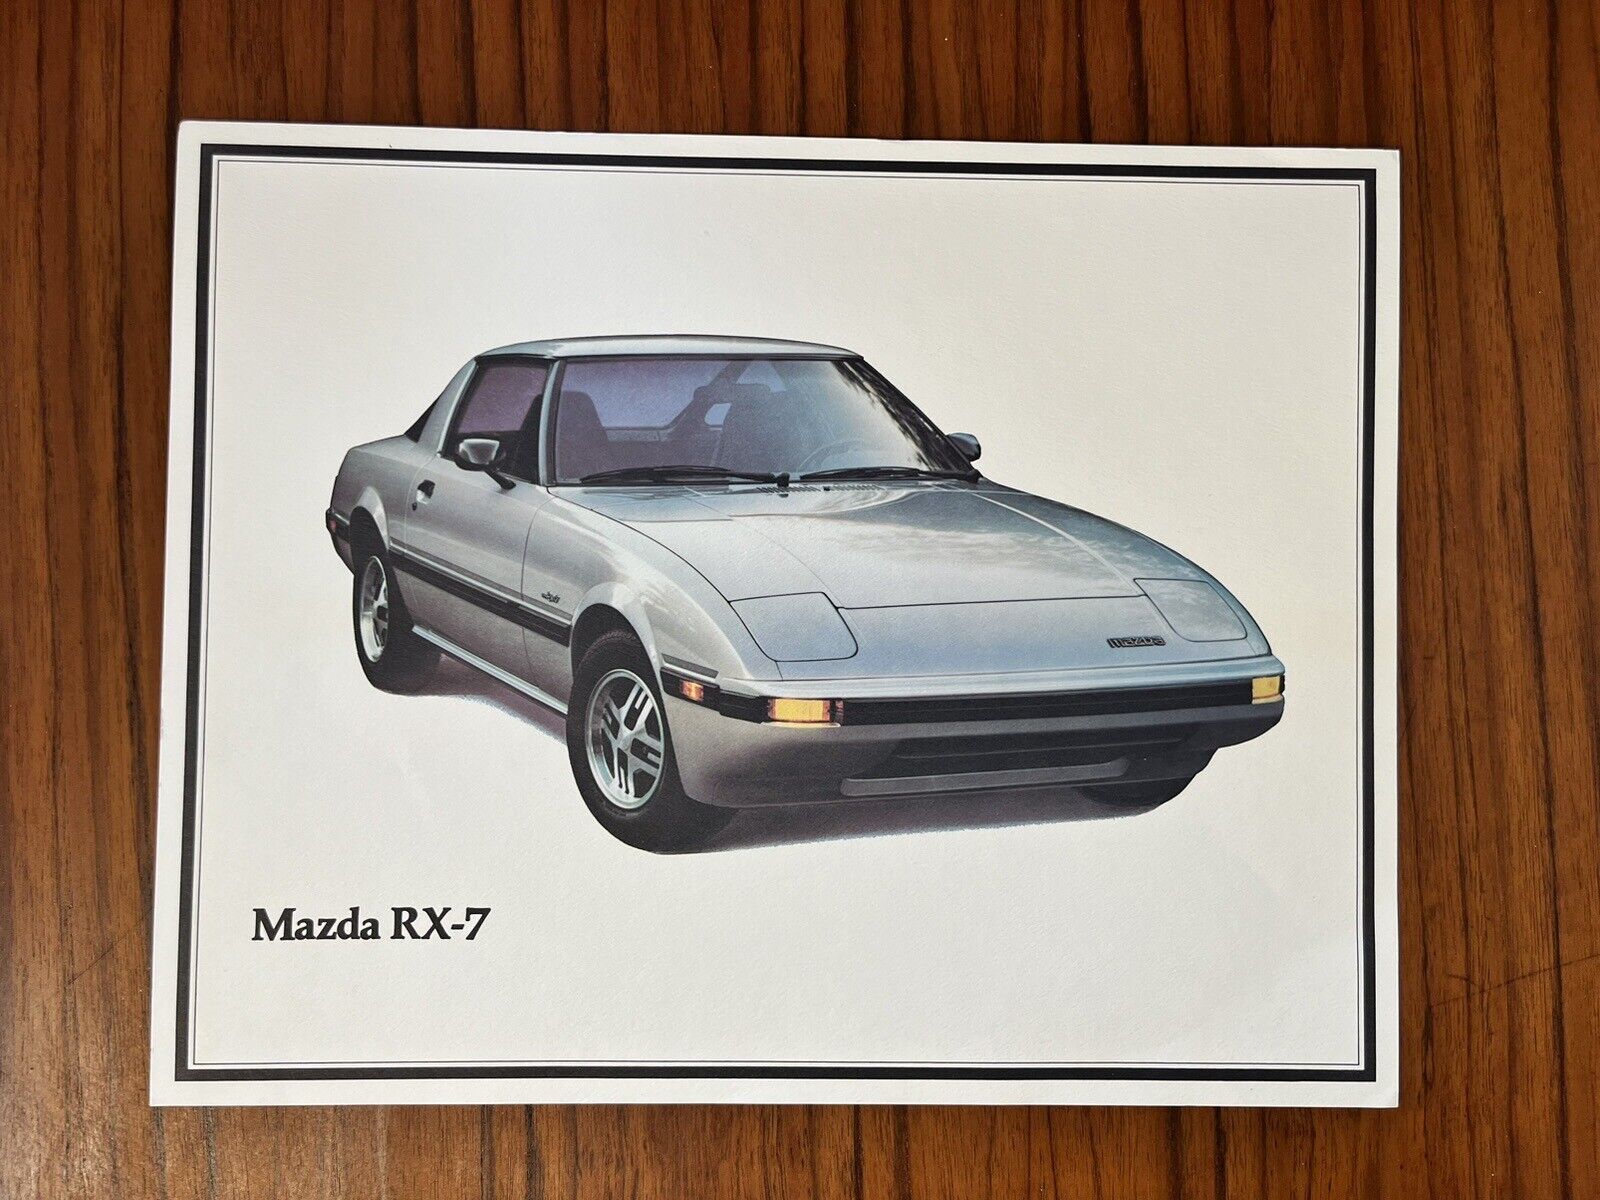 VINTAGE AUTHENTIC Mazda RX-7 Poster 